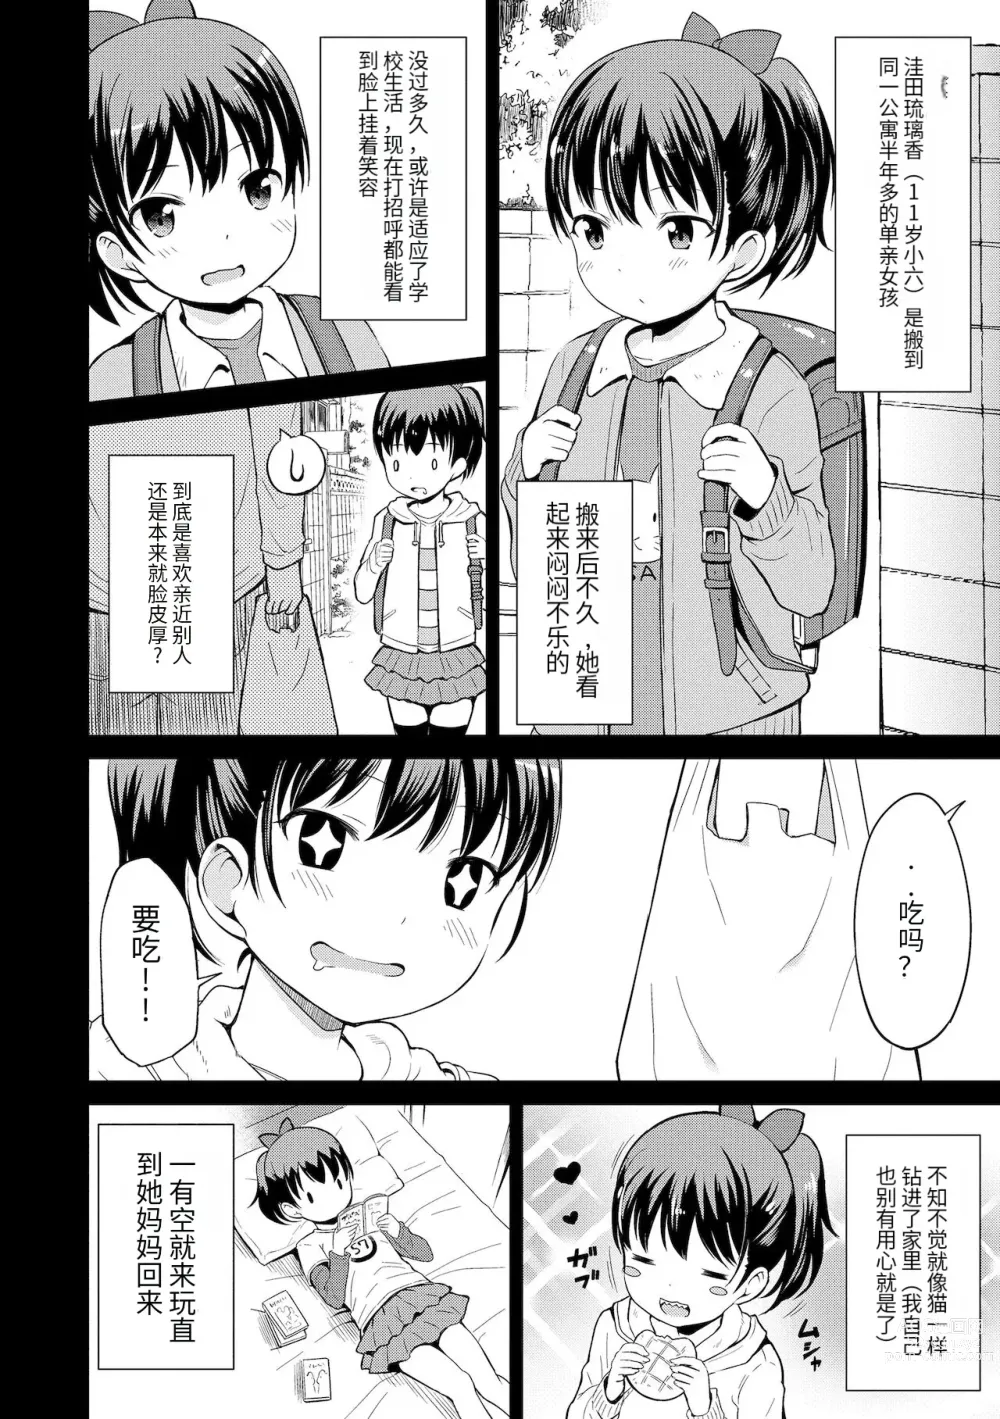 Page 5 of manga first  and second